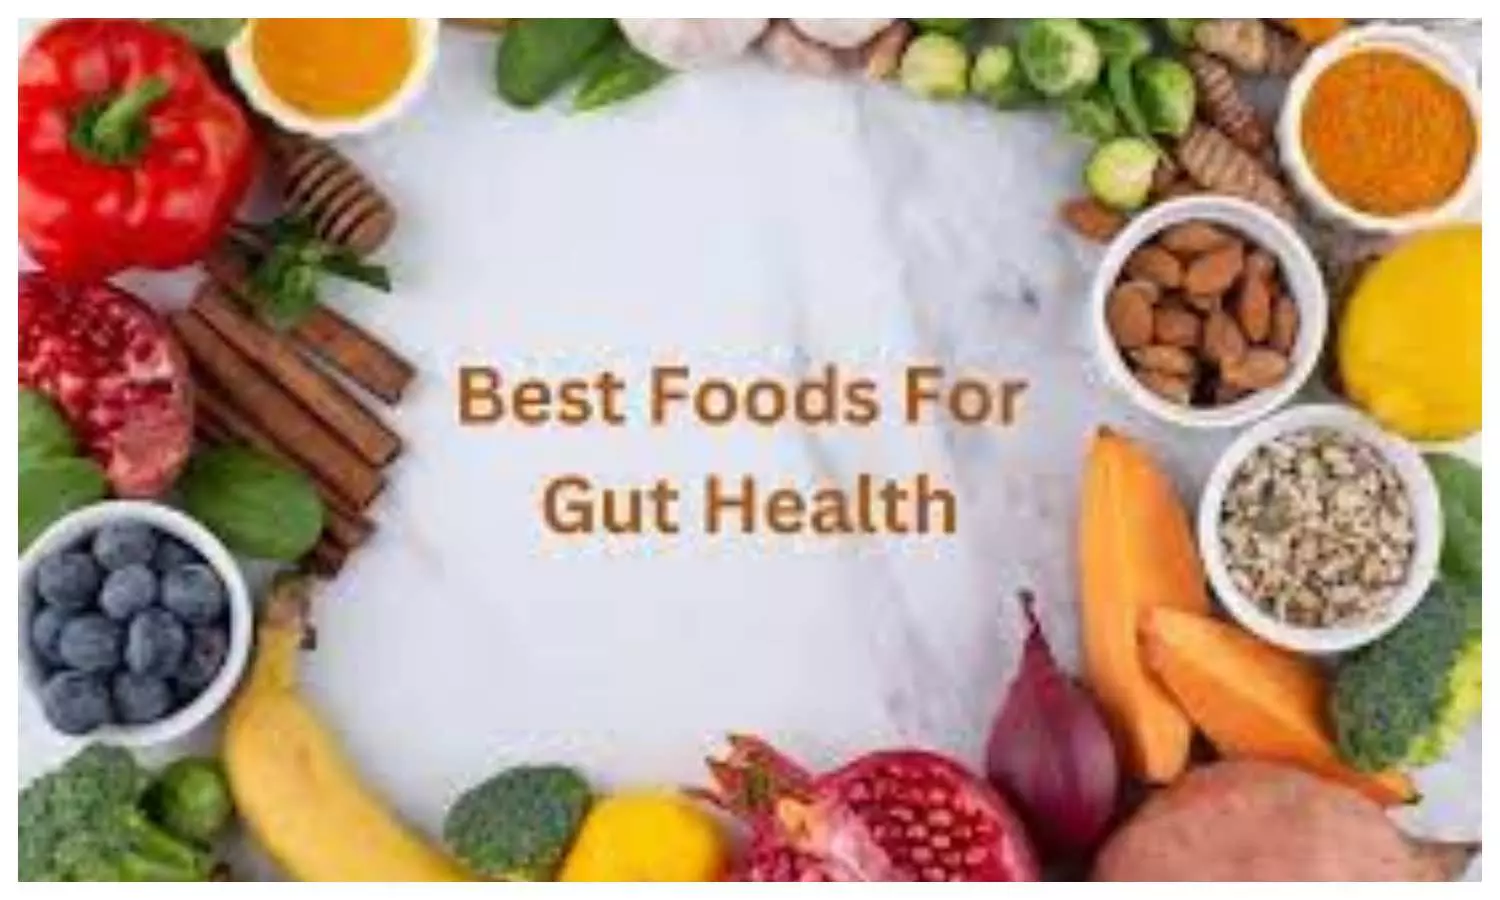 Food for Gut Health